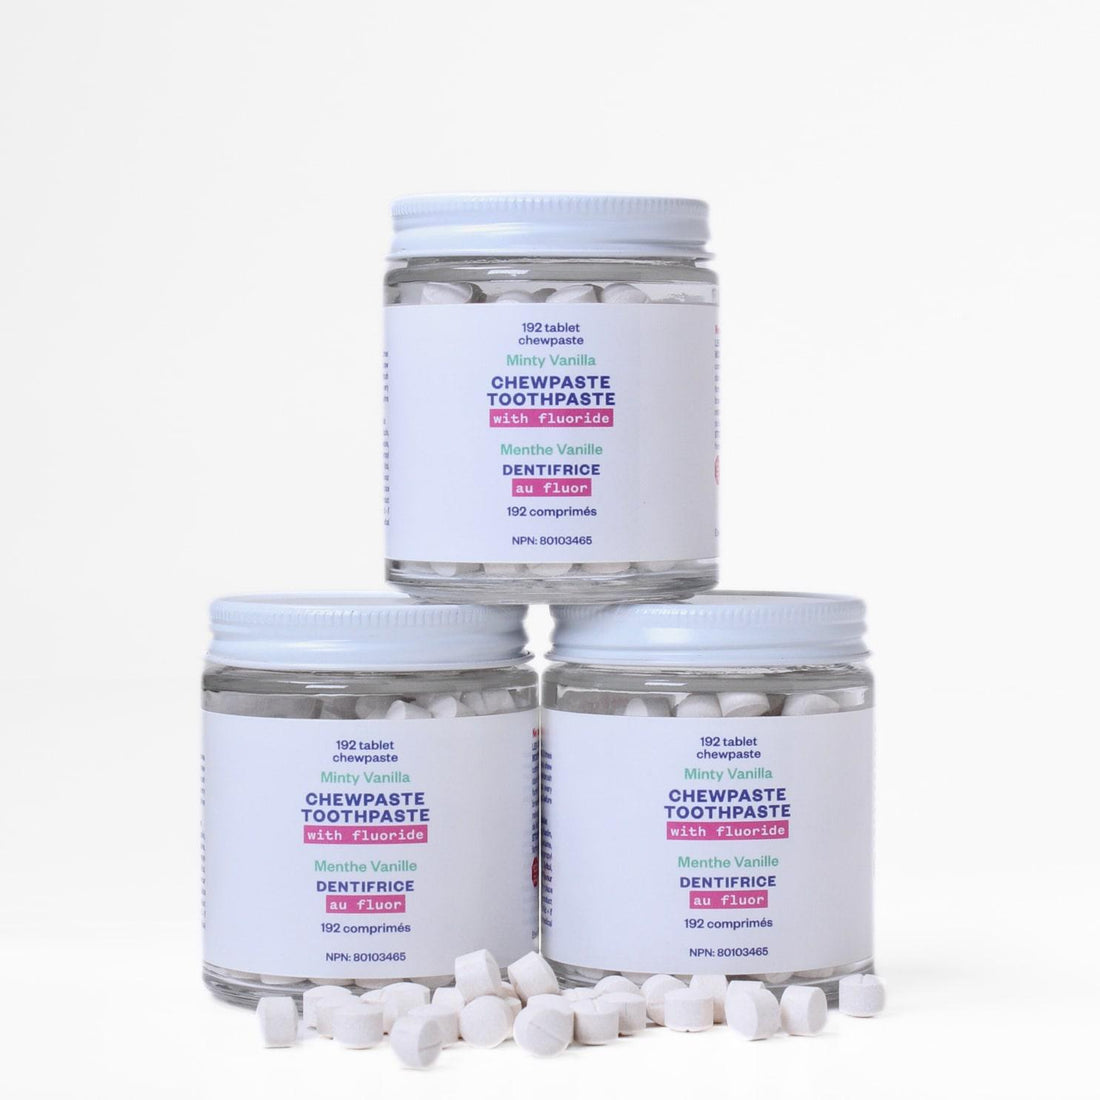 Three tubs of etee fluoride chewpaste stacked on top of each other with about 20 chewpaste tablets strewn in front of the jars